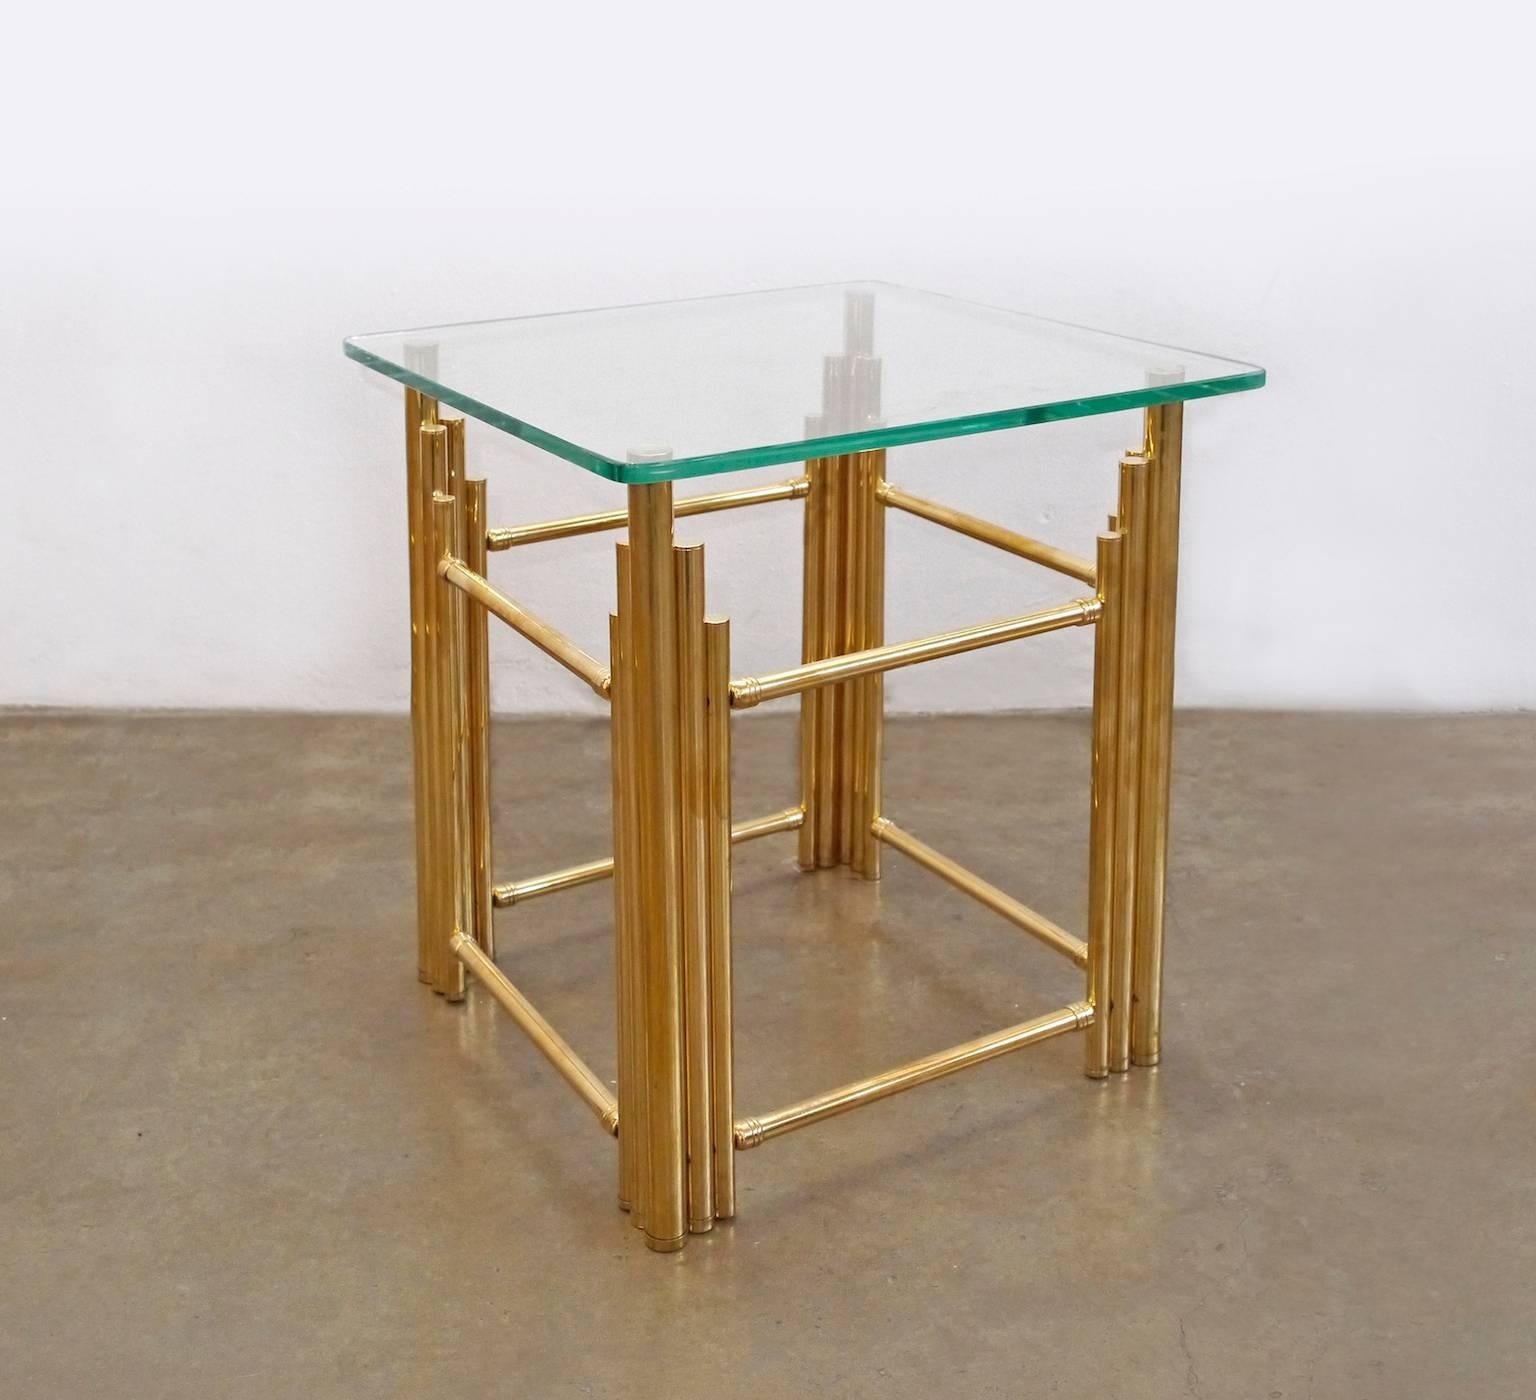 This stylish pair of brass side tables is composed of vertical escalating brass tubes connected by brass stretchers.